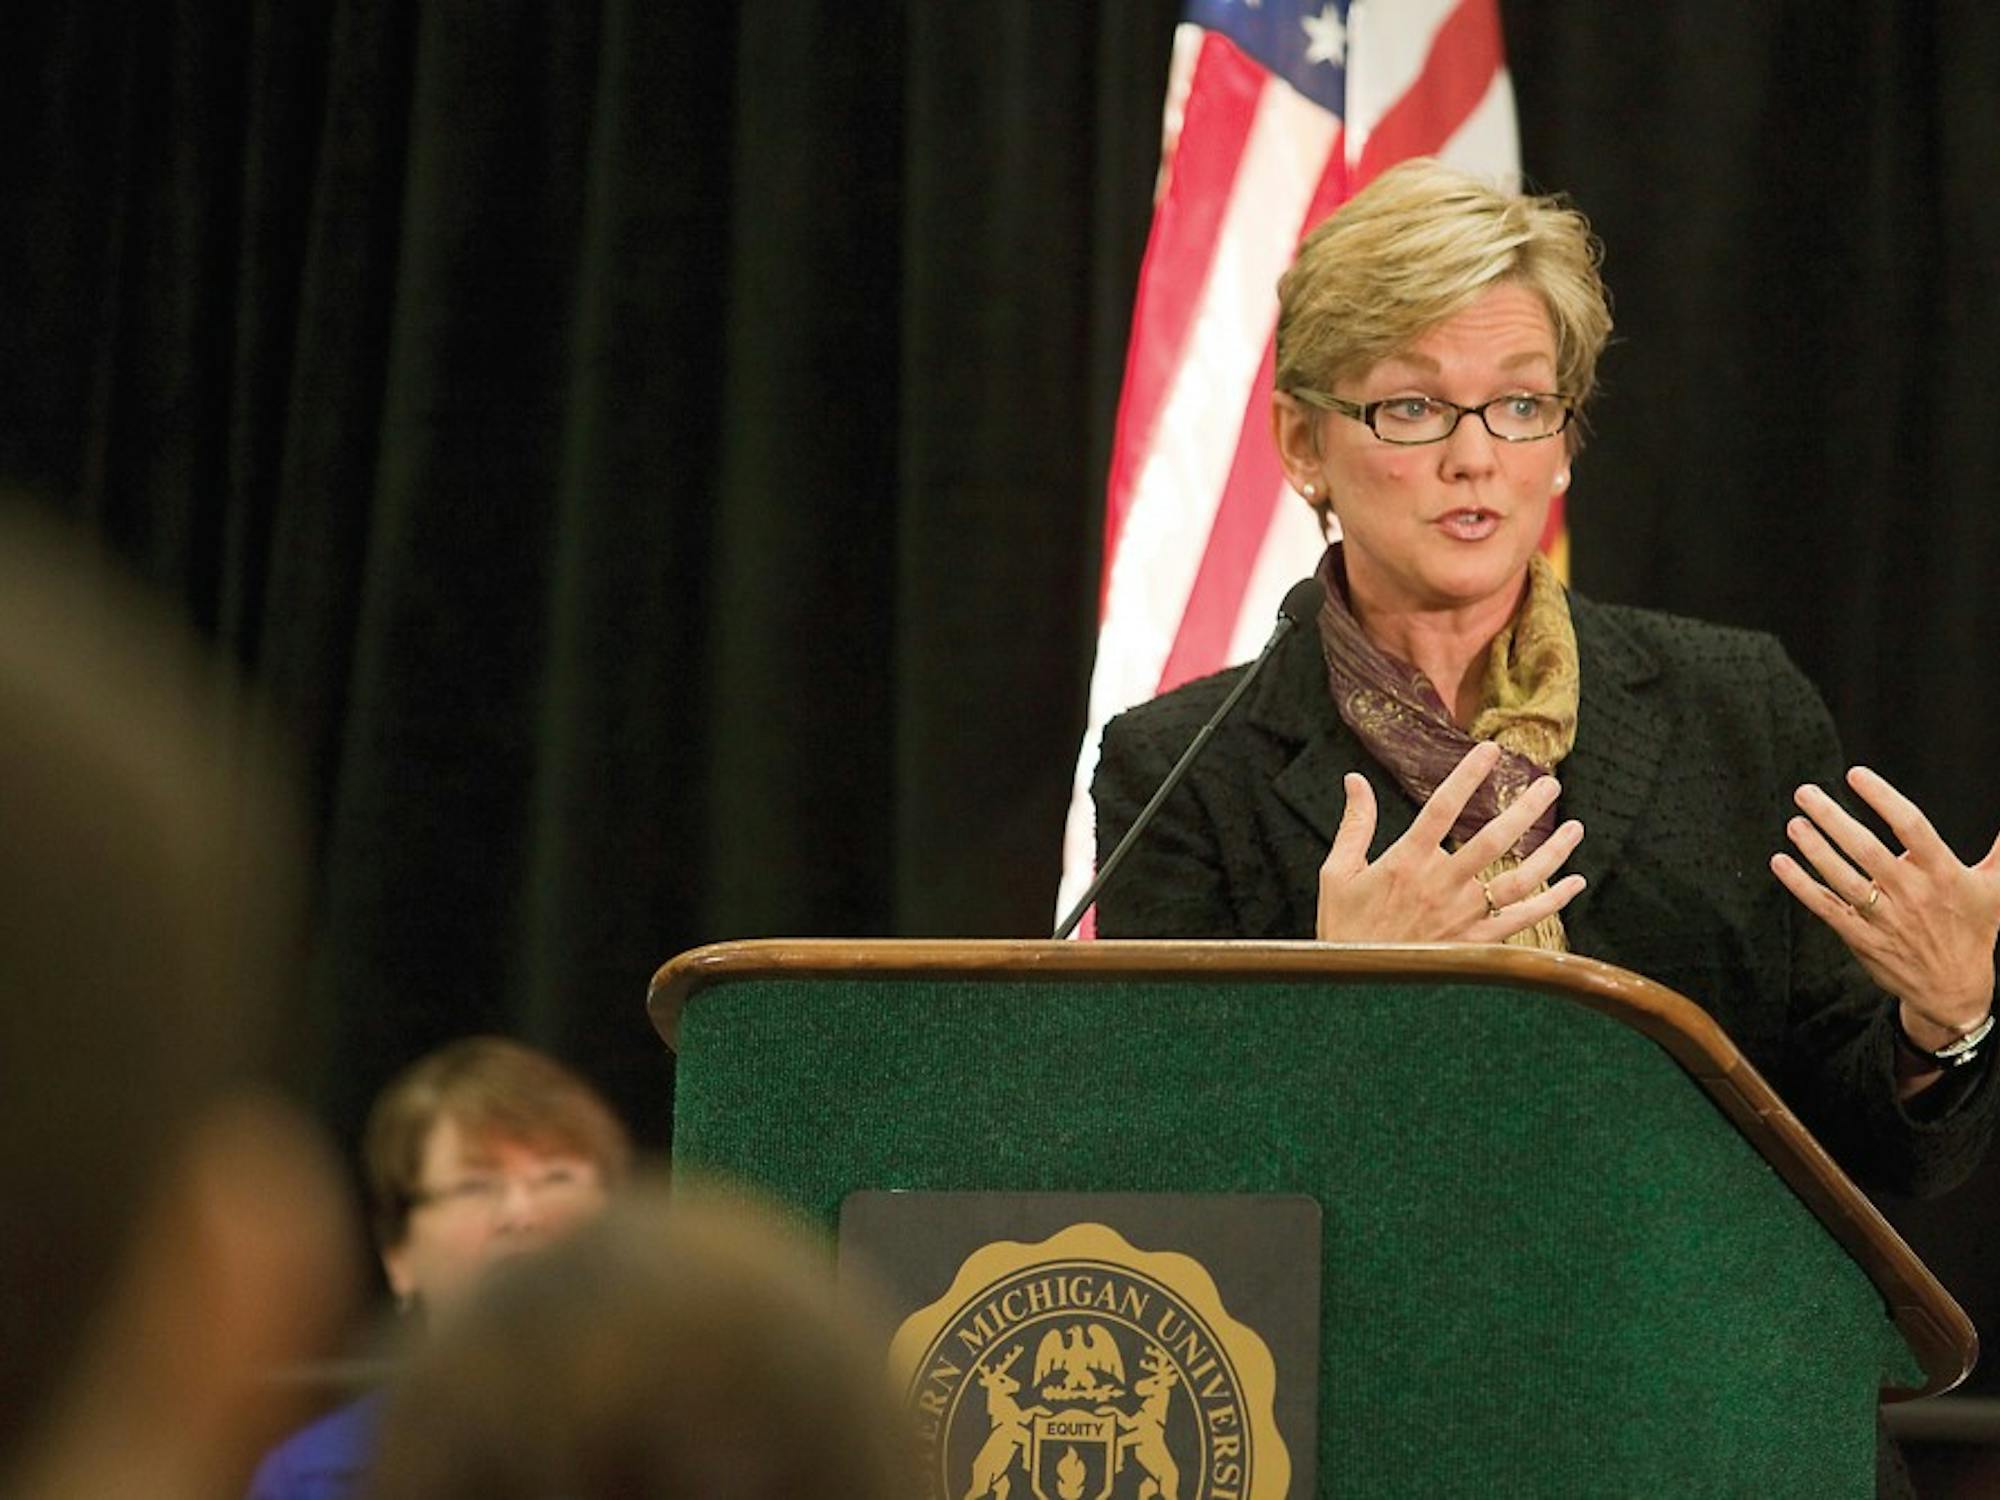 Last Monday Gov. Granholm came to the Student Center to talk with students about the recently cut Promise Scholarship.